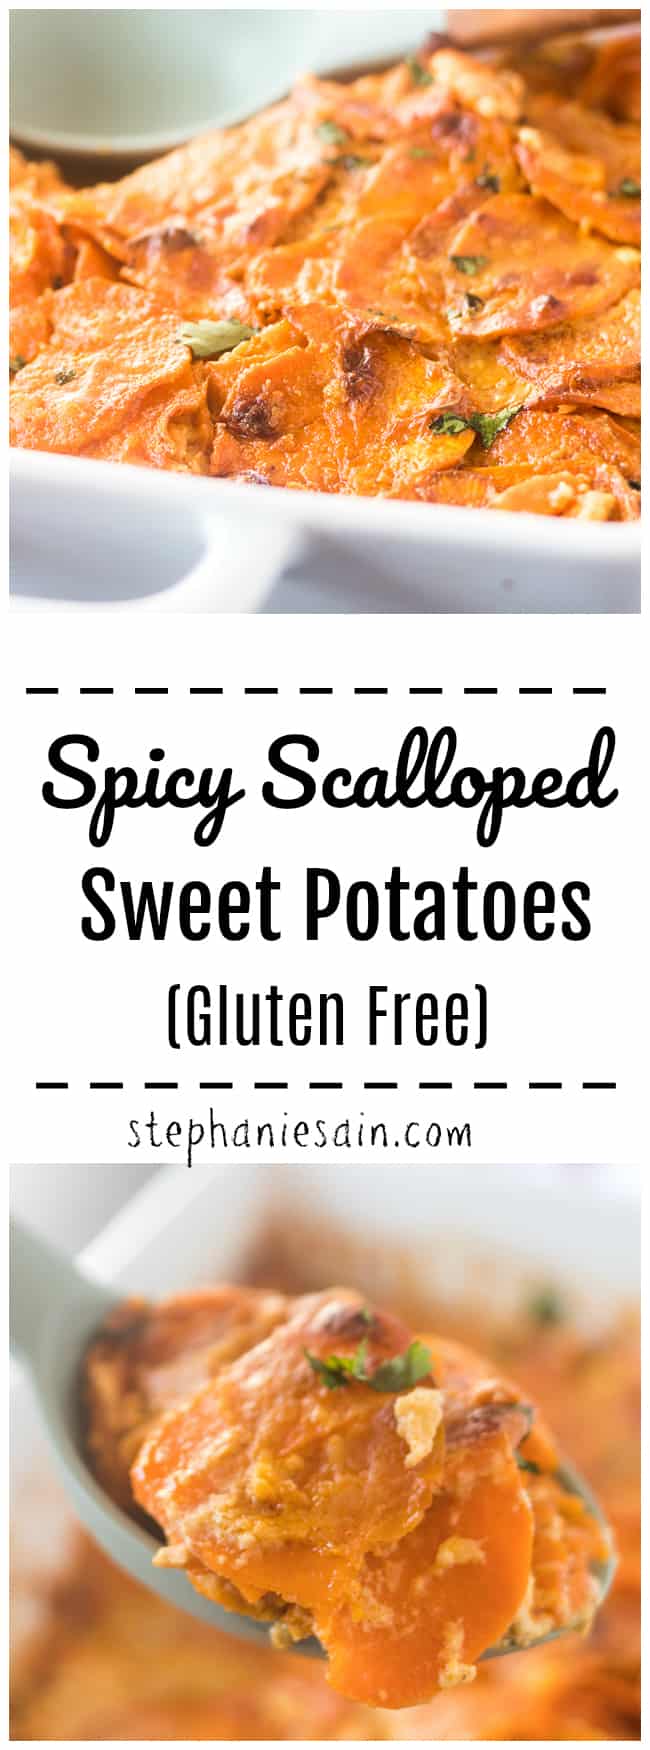 These Scalloped Sweet Potatoes are the perfect blend of both spicy & sweet. An easy to make side dish perfect for the holidays or anytime. Gluten Free.